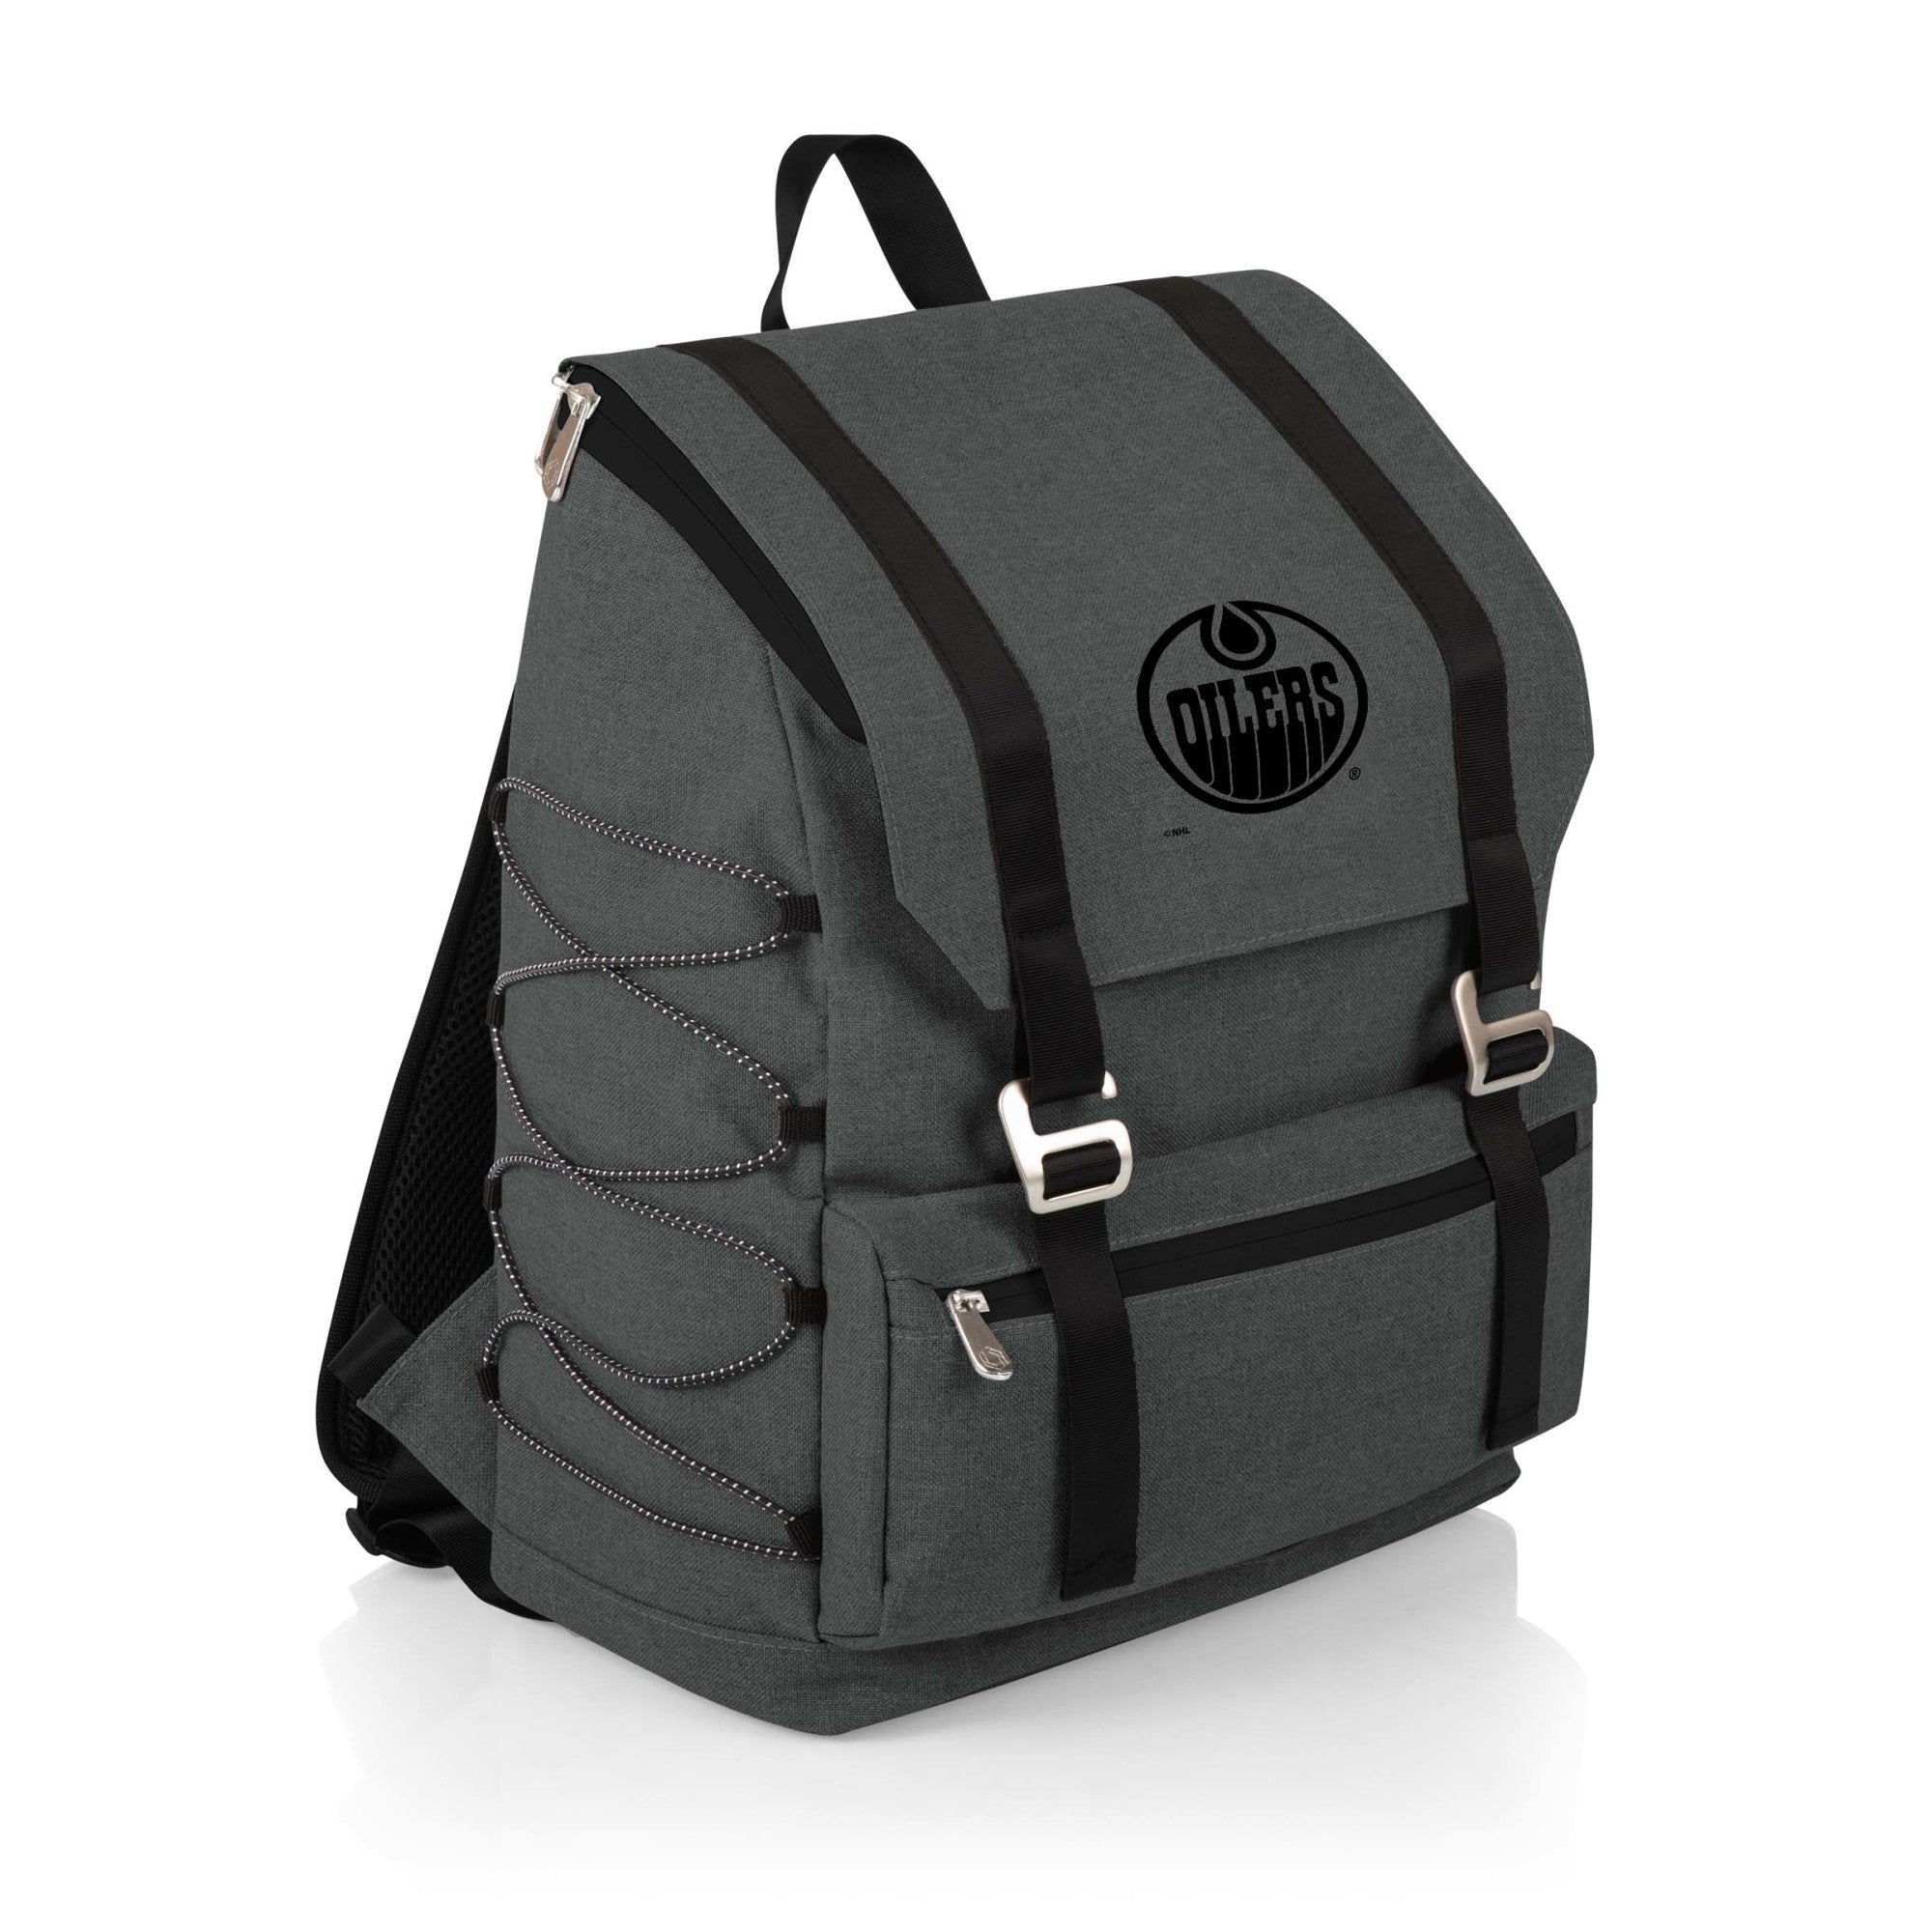 Edmonton Oilers - On The Go Traverse Backpack Cooler